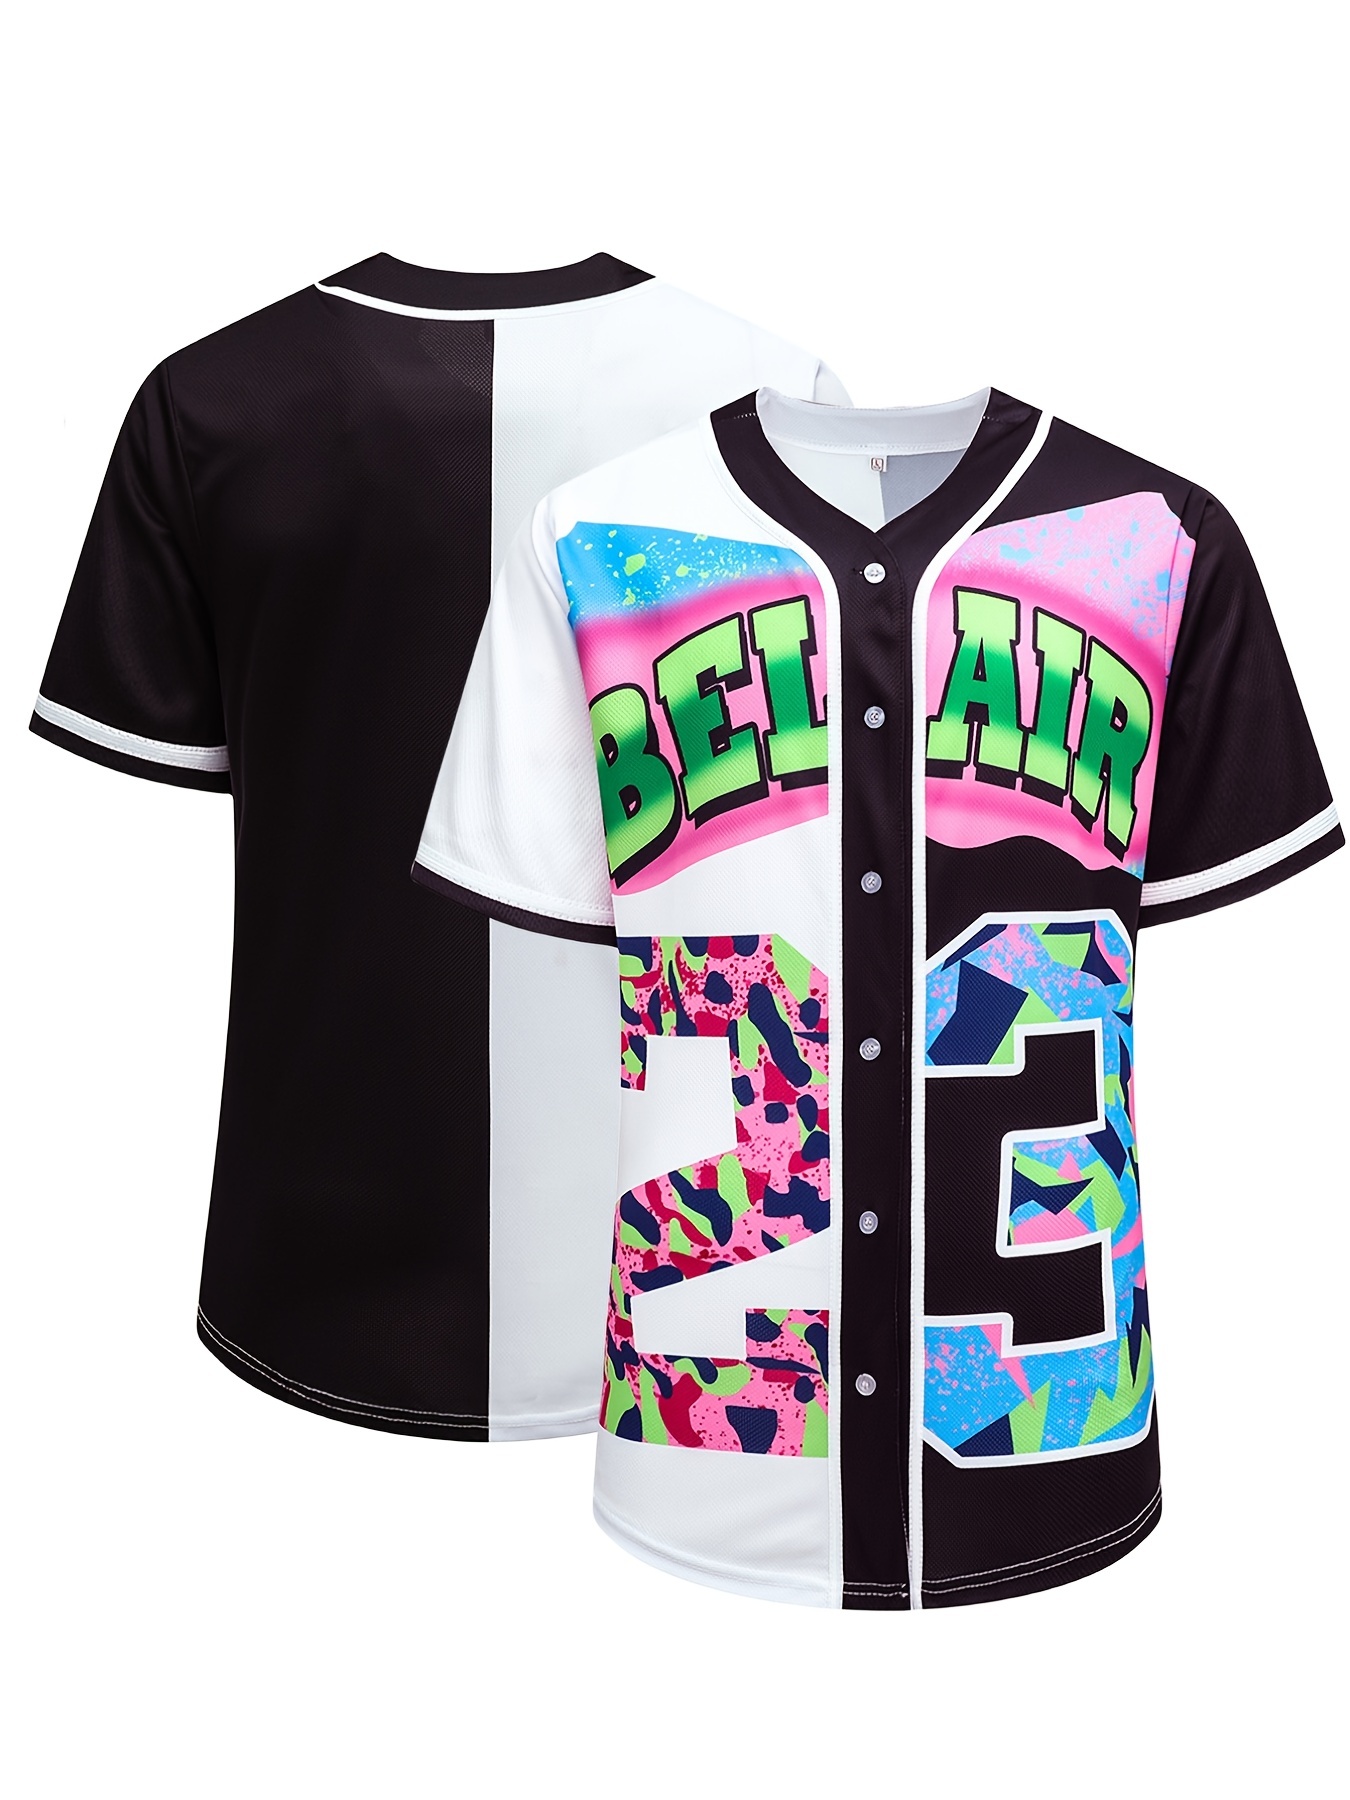 Buy Bel Air 23 Clothing for Men Women, 90s Theme Party Hip Hop Baseball  Jersey Short Sleeves Top Fashion Shirt for Unisex, Style 14, Large at